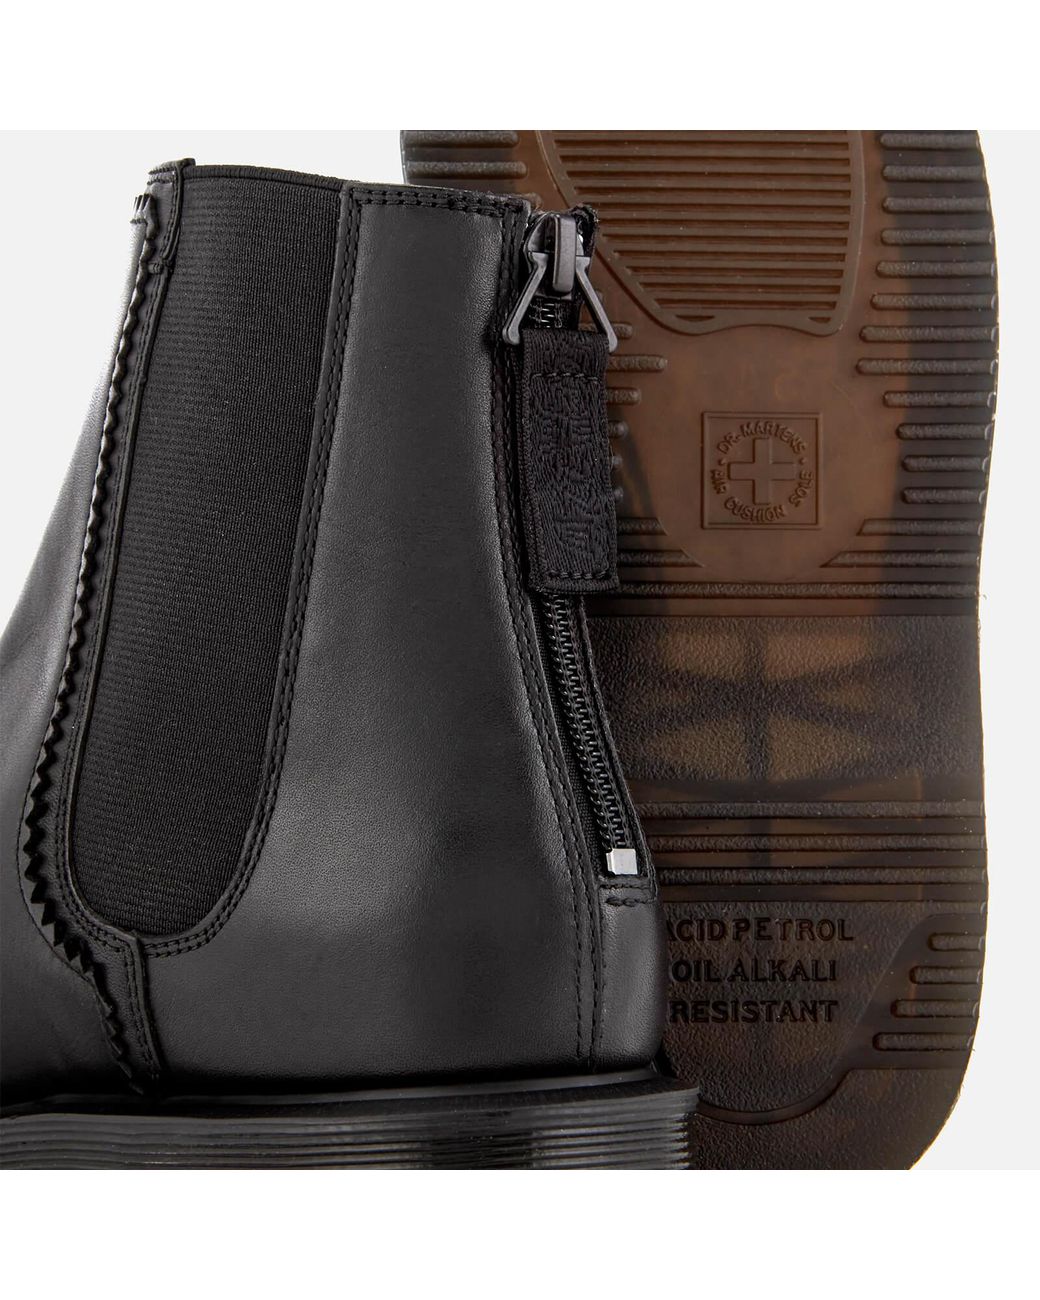 Dr. Martens Zillow Temperley Leather Zip Back Chelsea Boots in Black | Lyst  Australia